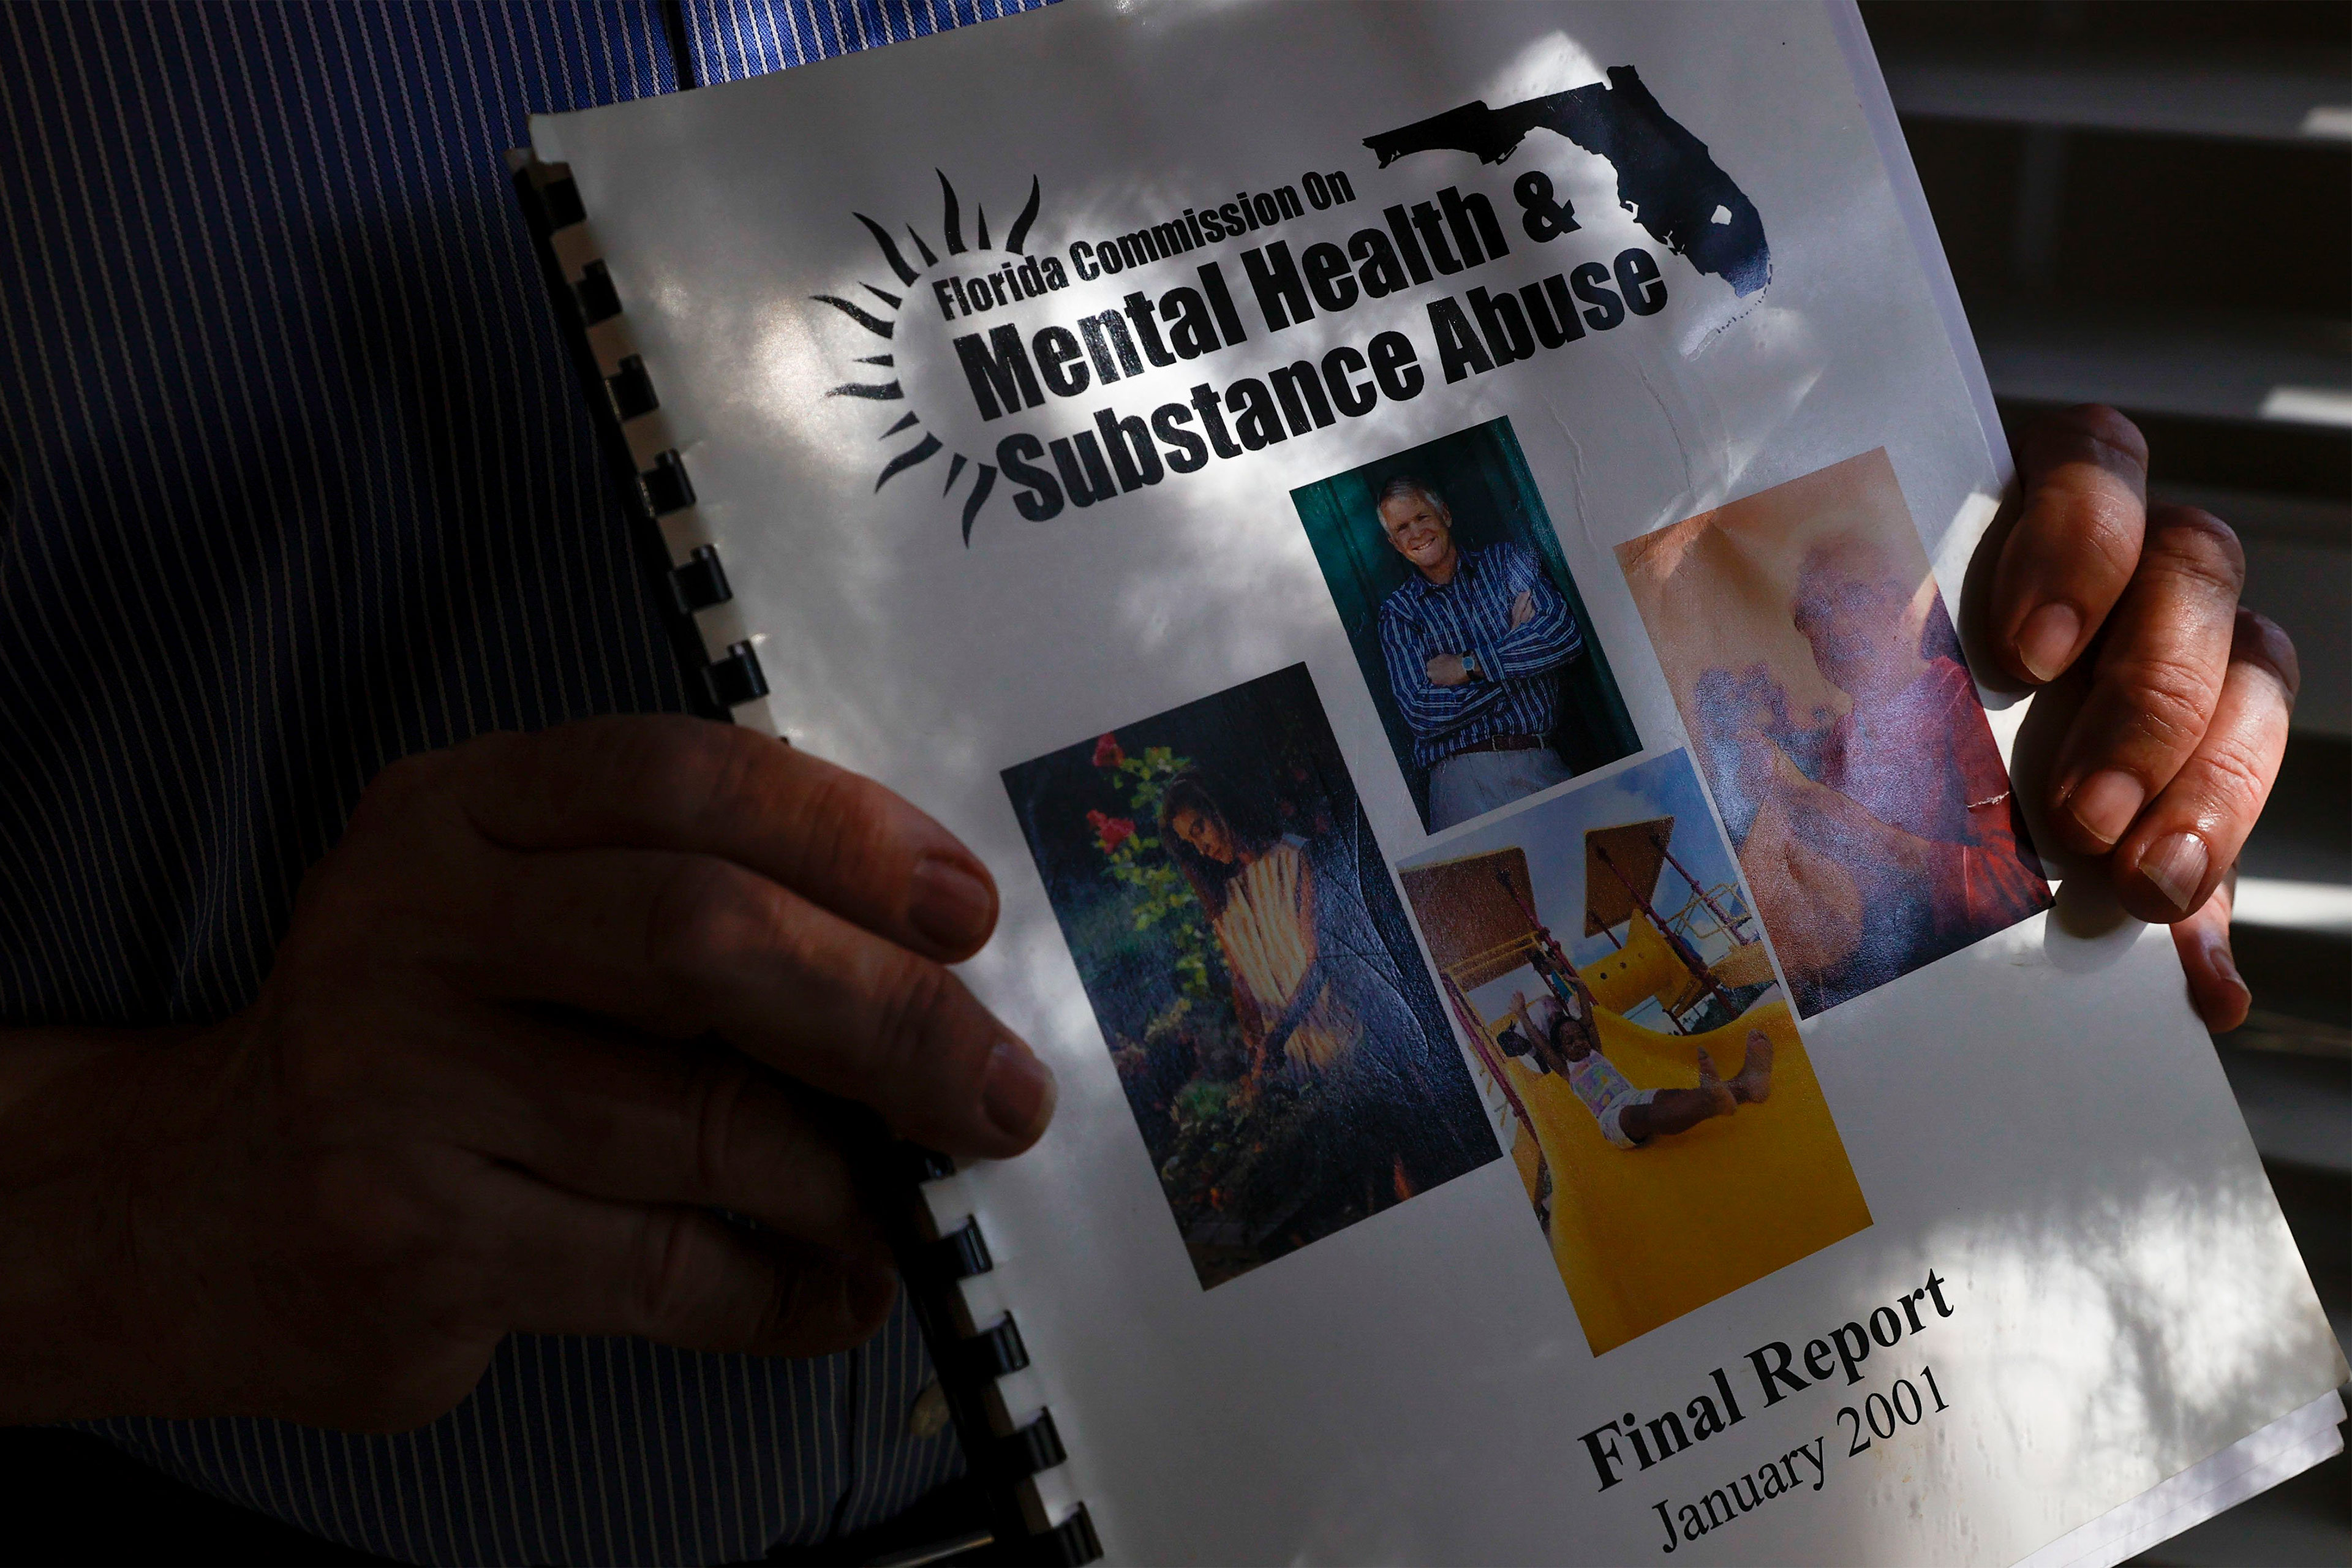 A close-up photo of the Florida mental health commission report released in 2001.